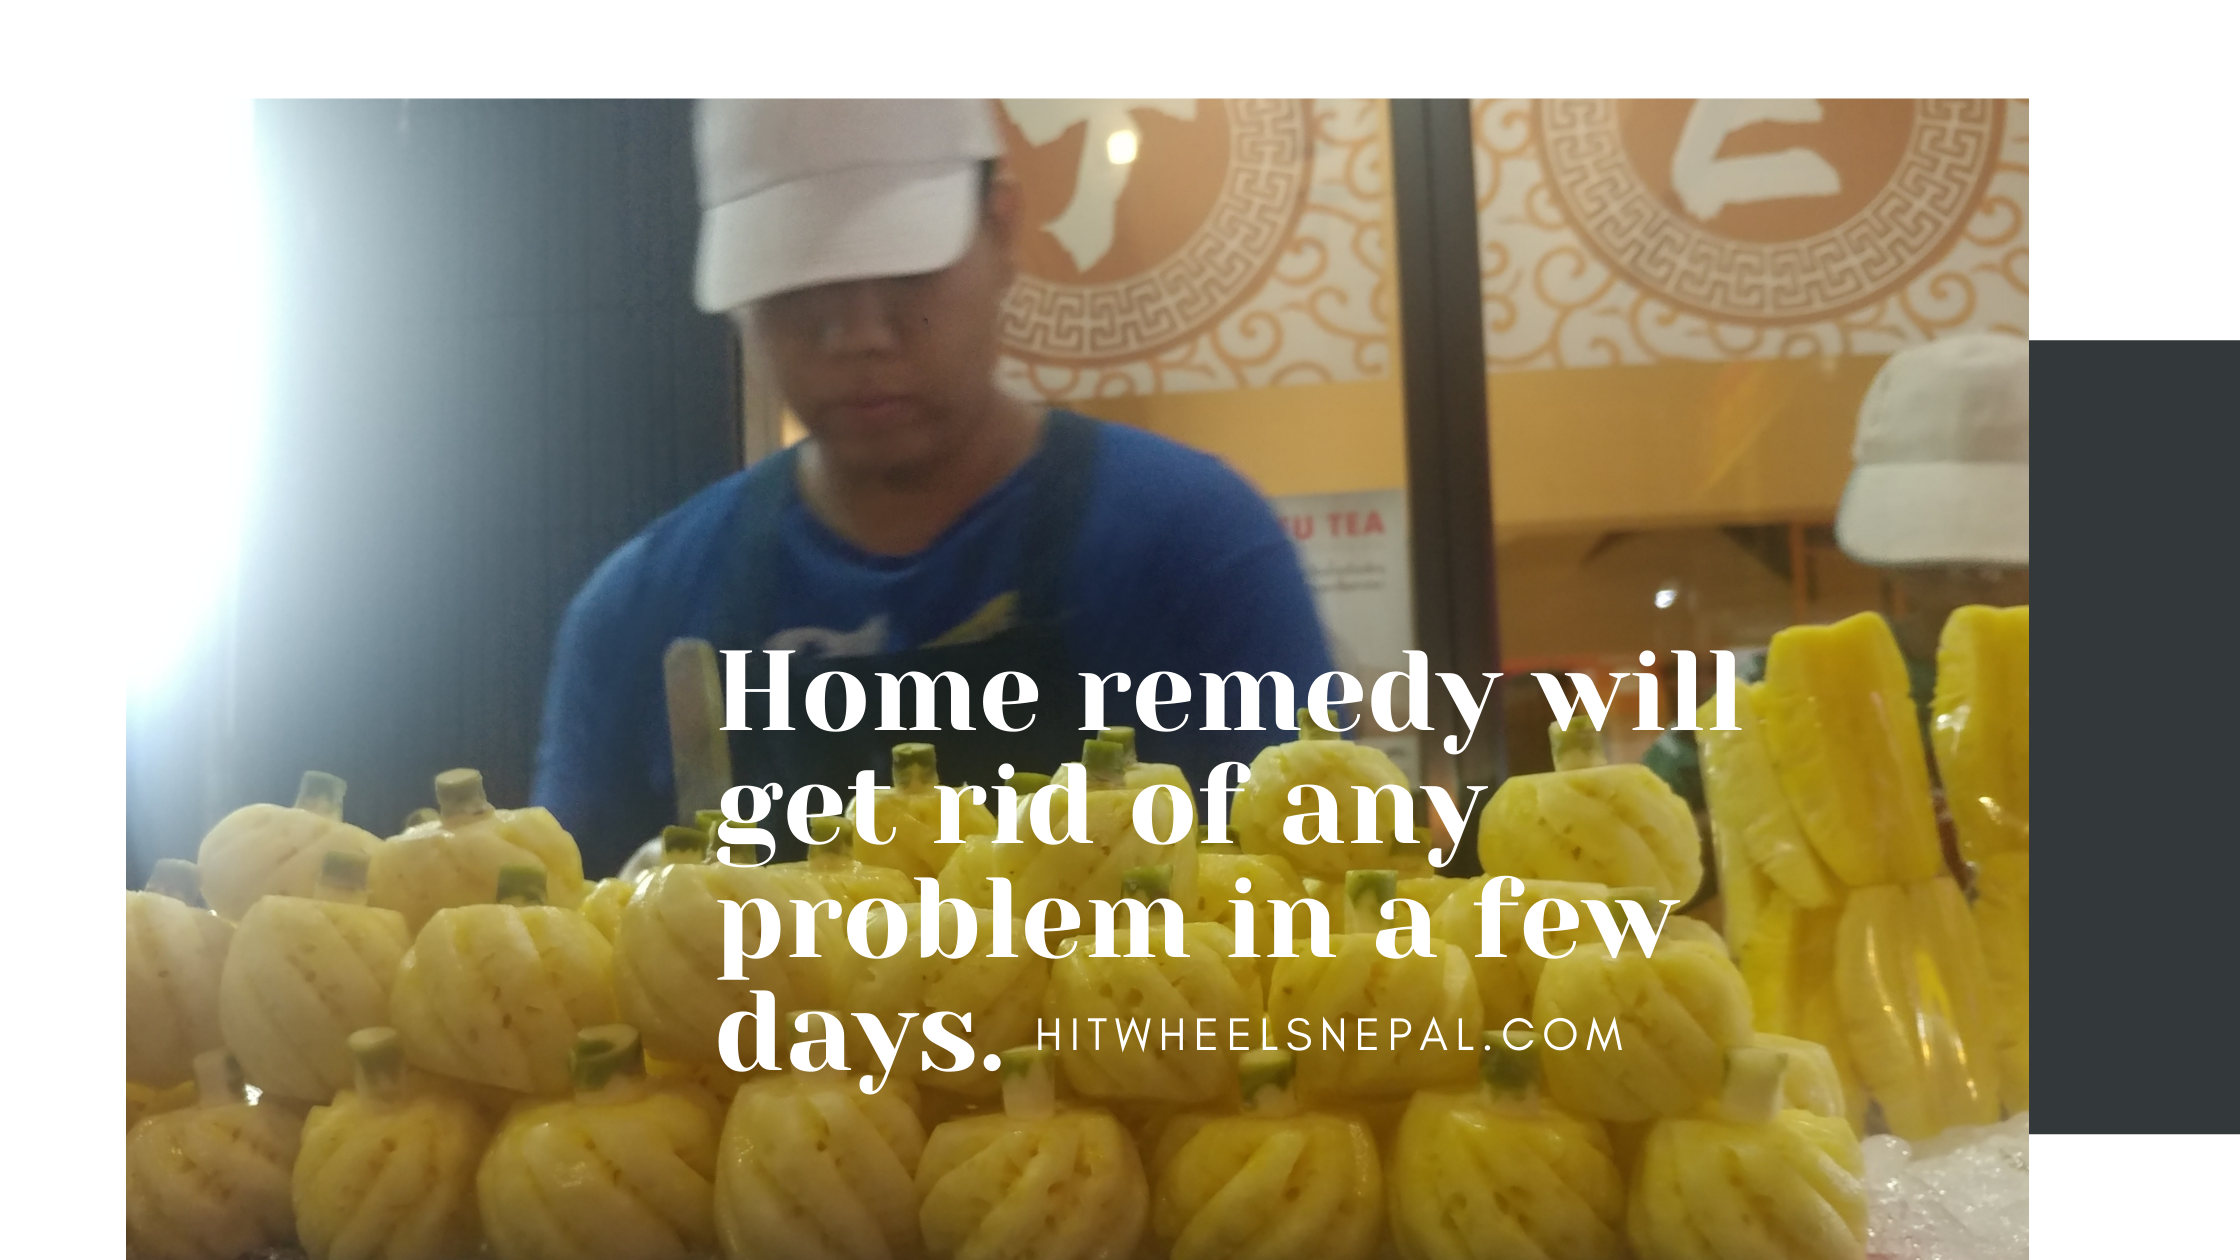 Home remedy will get rid of any problem in a few days.